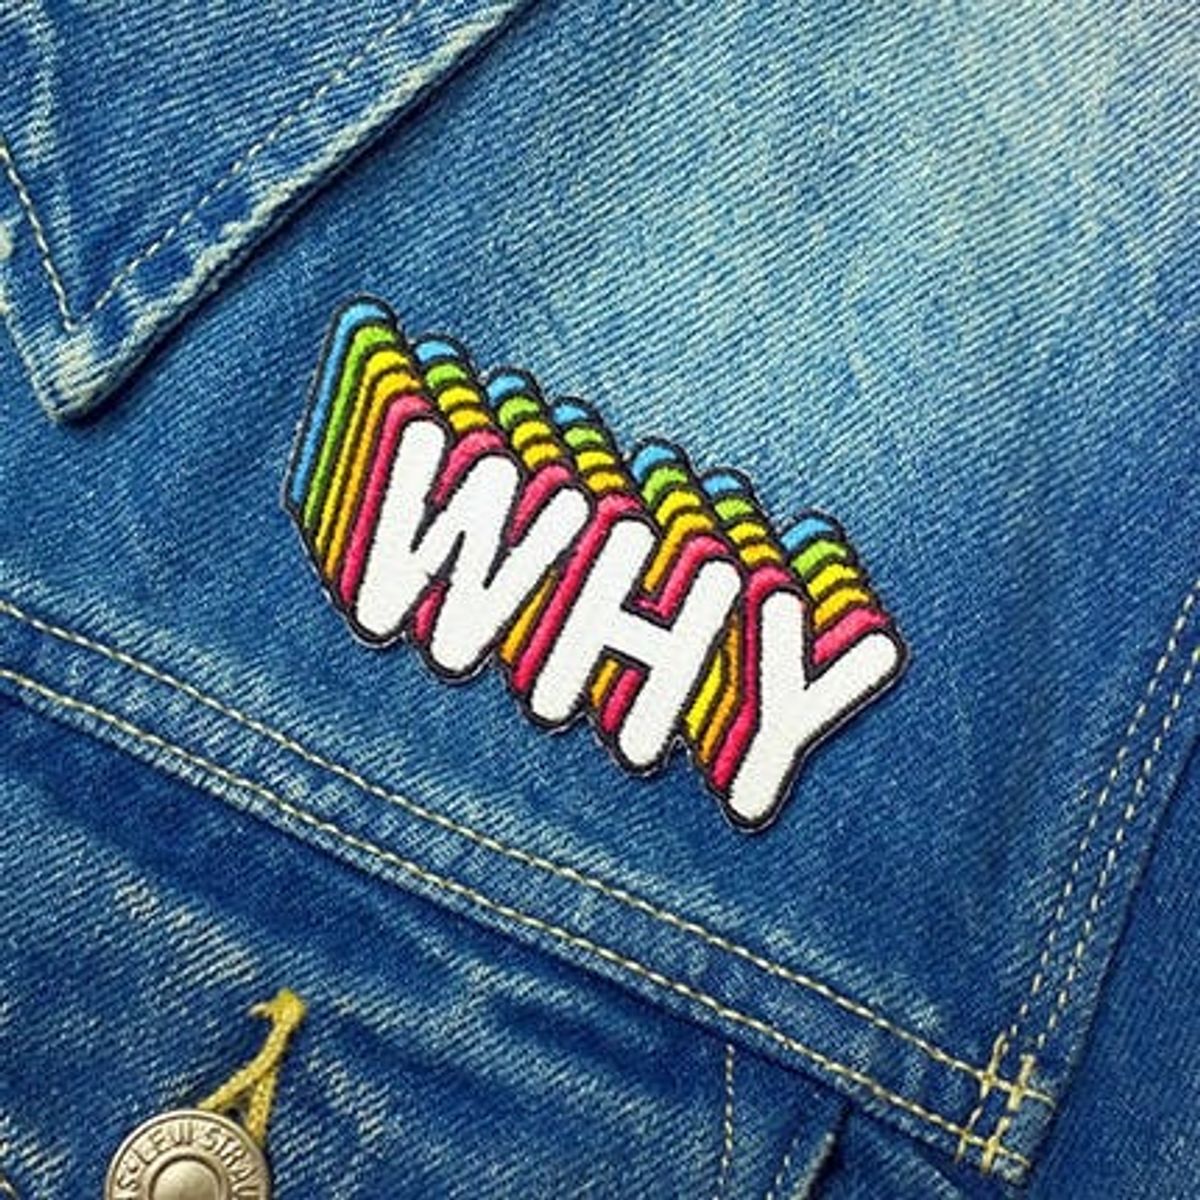 20 Pins + Patches to Match Your Personality